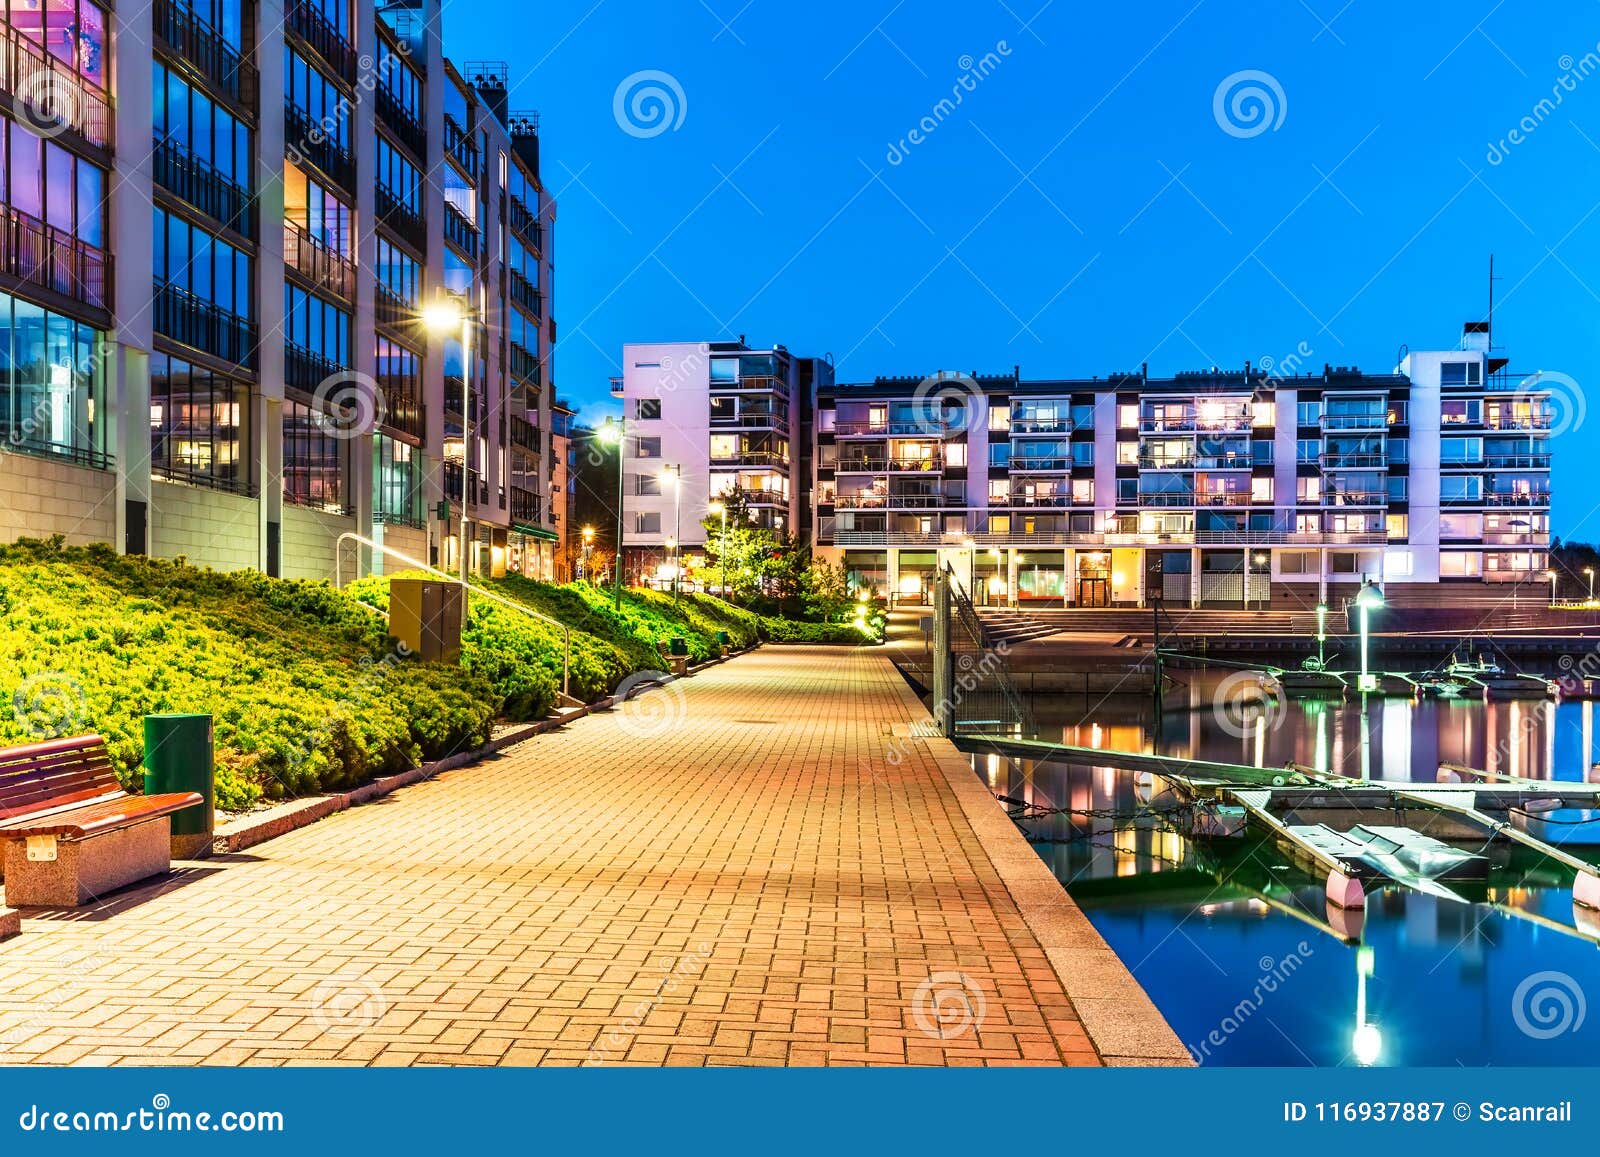 modern residential district real estate